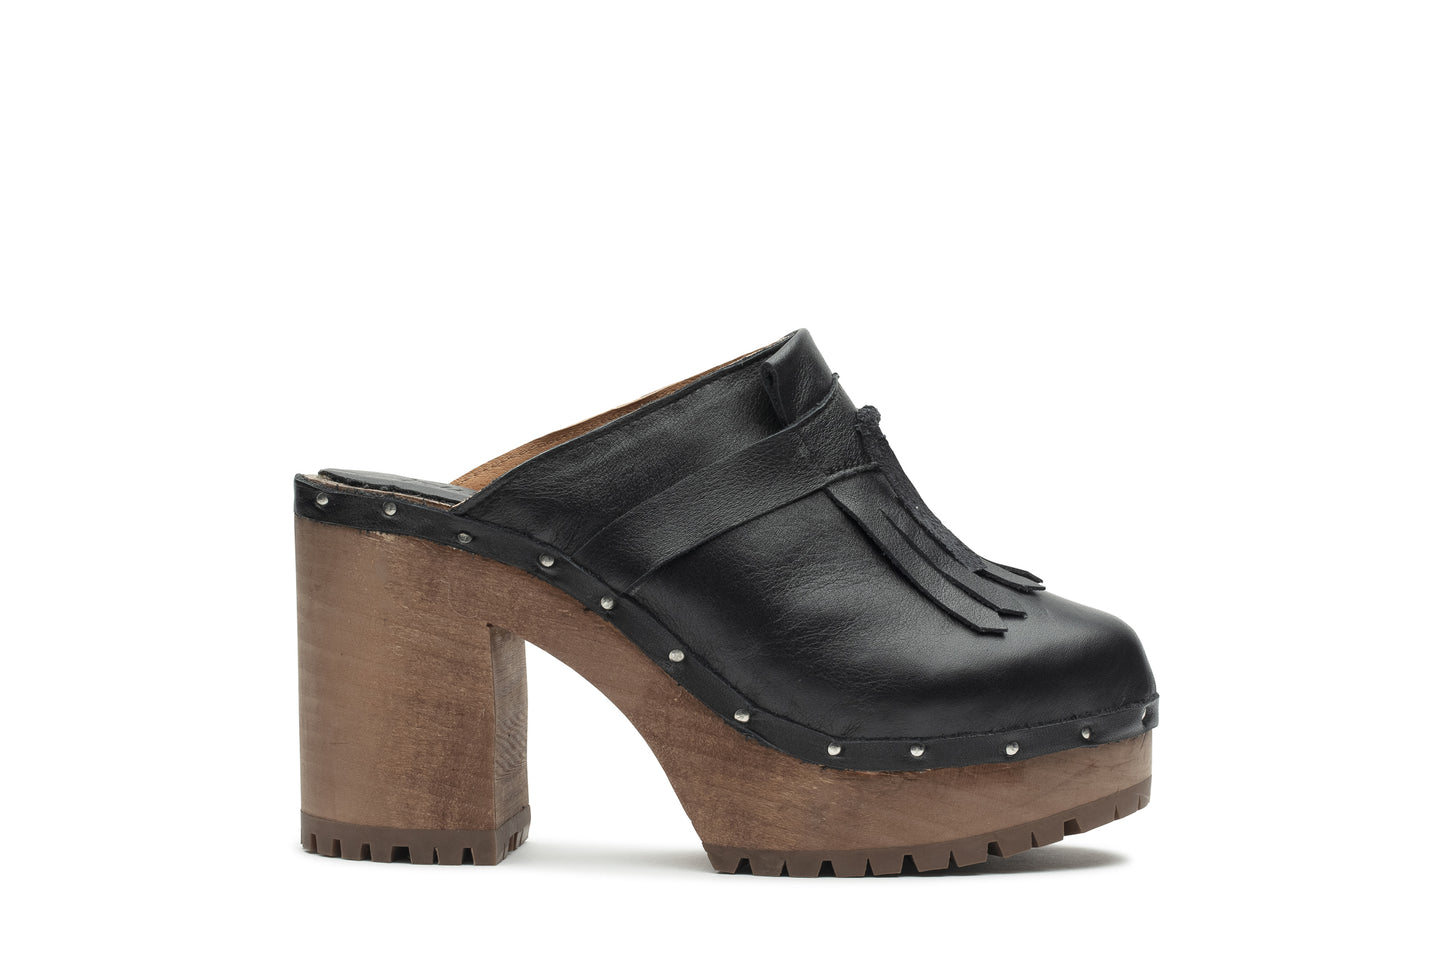 Wooden heel fringed clogs